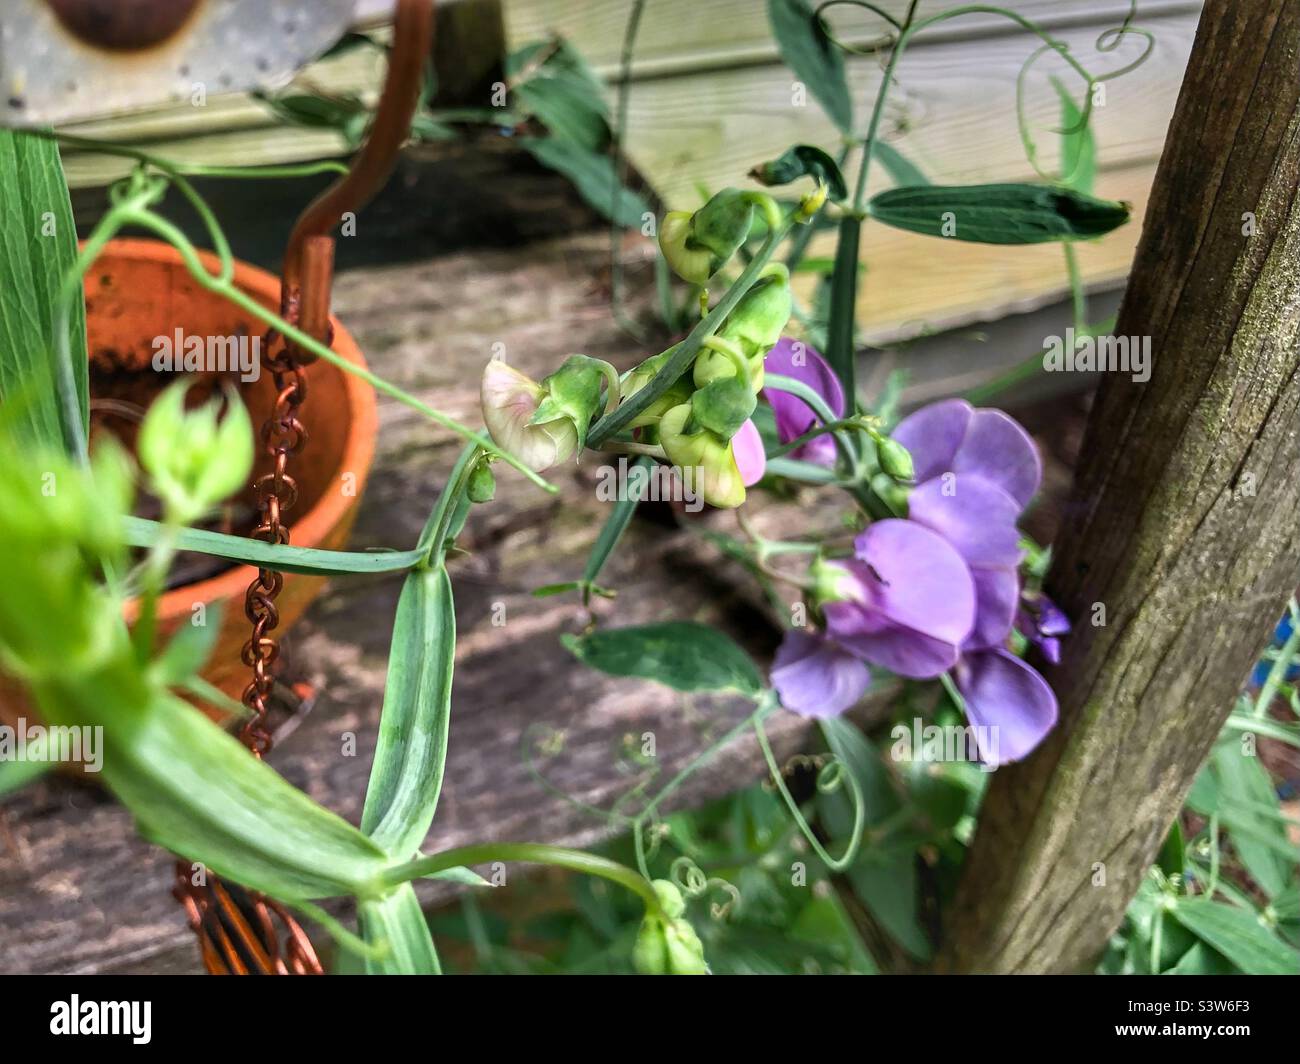 Sweet pea vine flowers on a rustic ladder Stock Photo